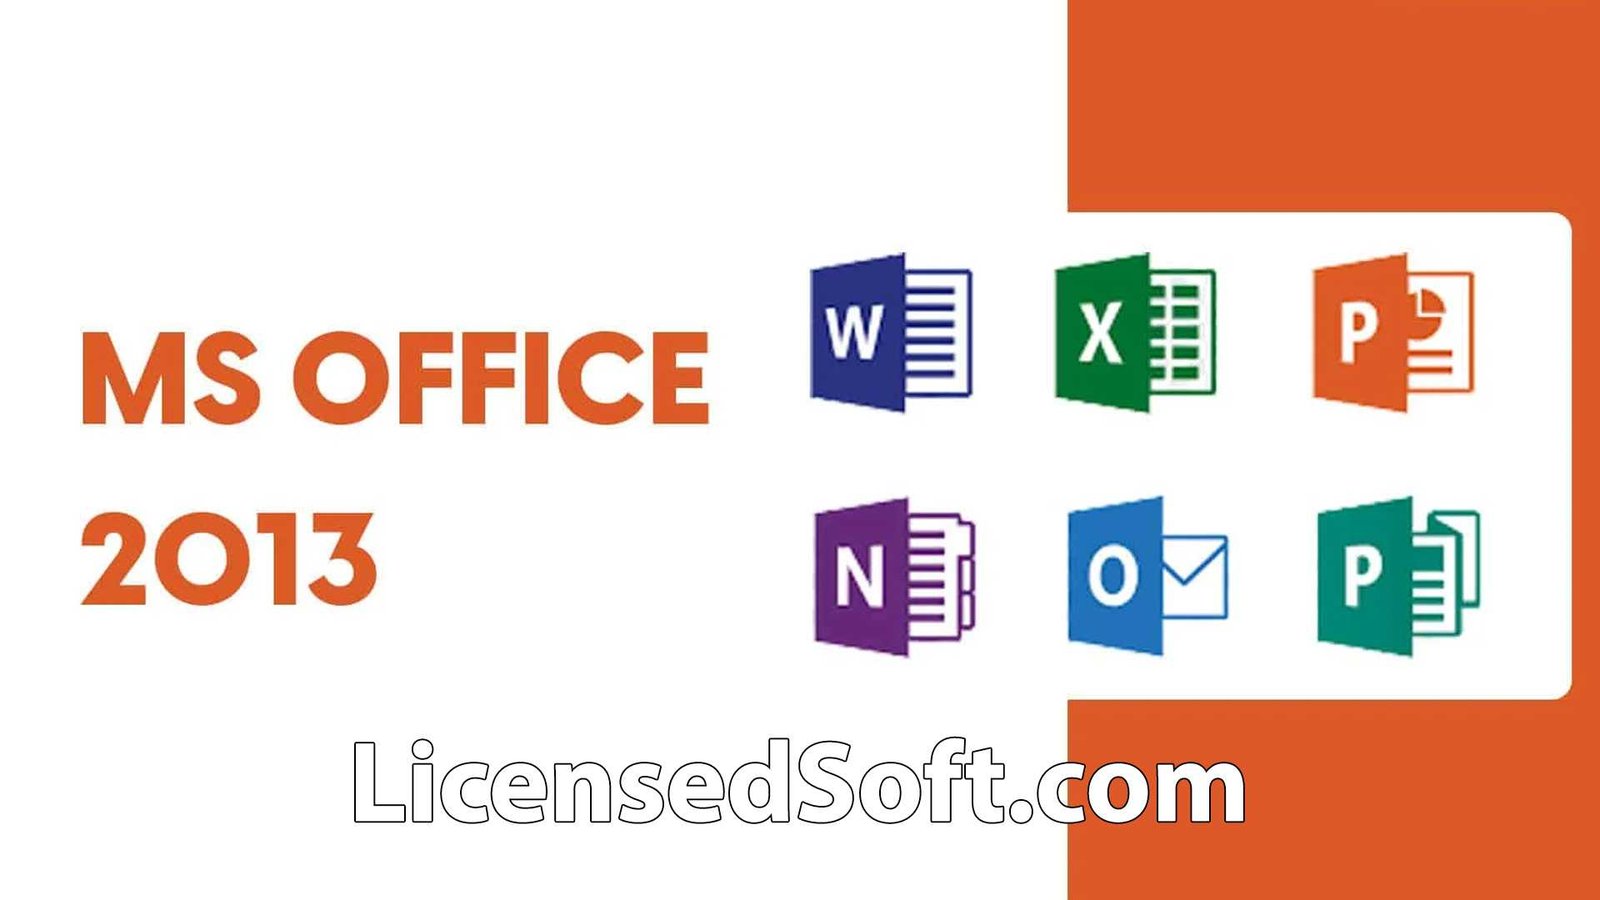 Microsoft Office 2013 Professional Plus Full Cover Image By LicensedSoft